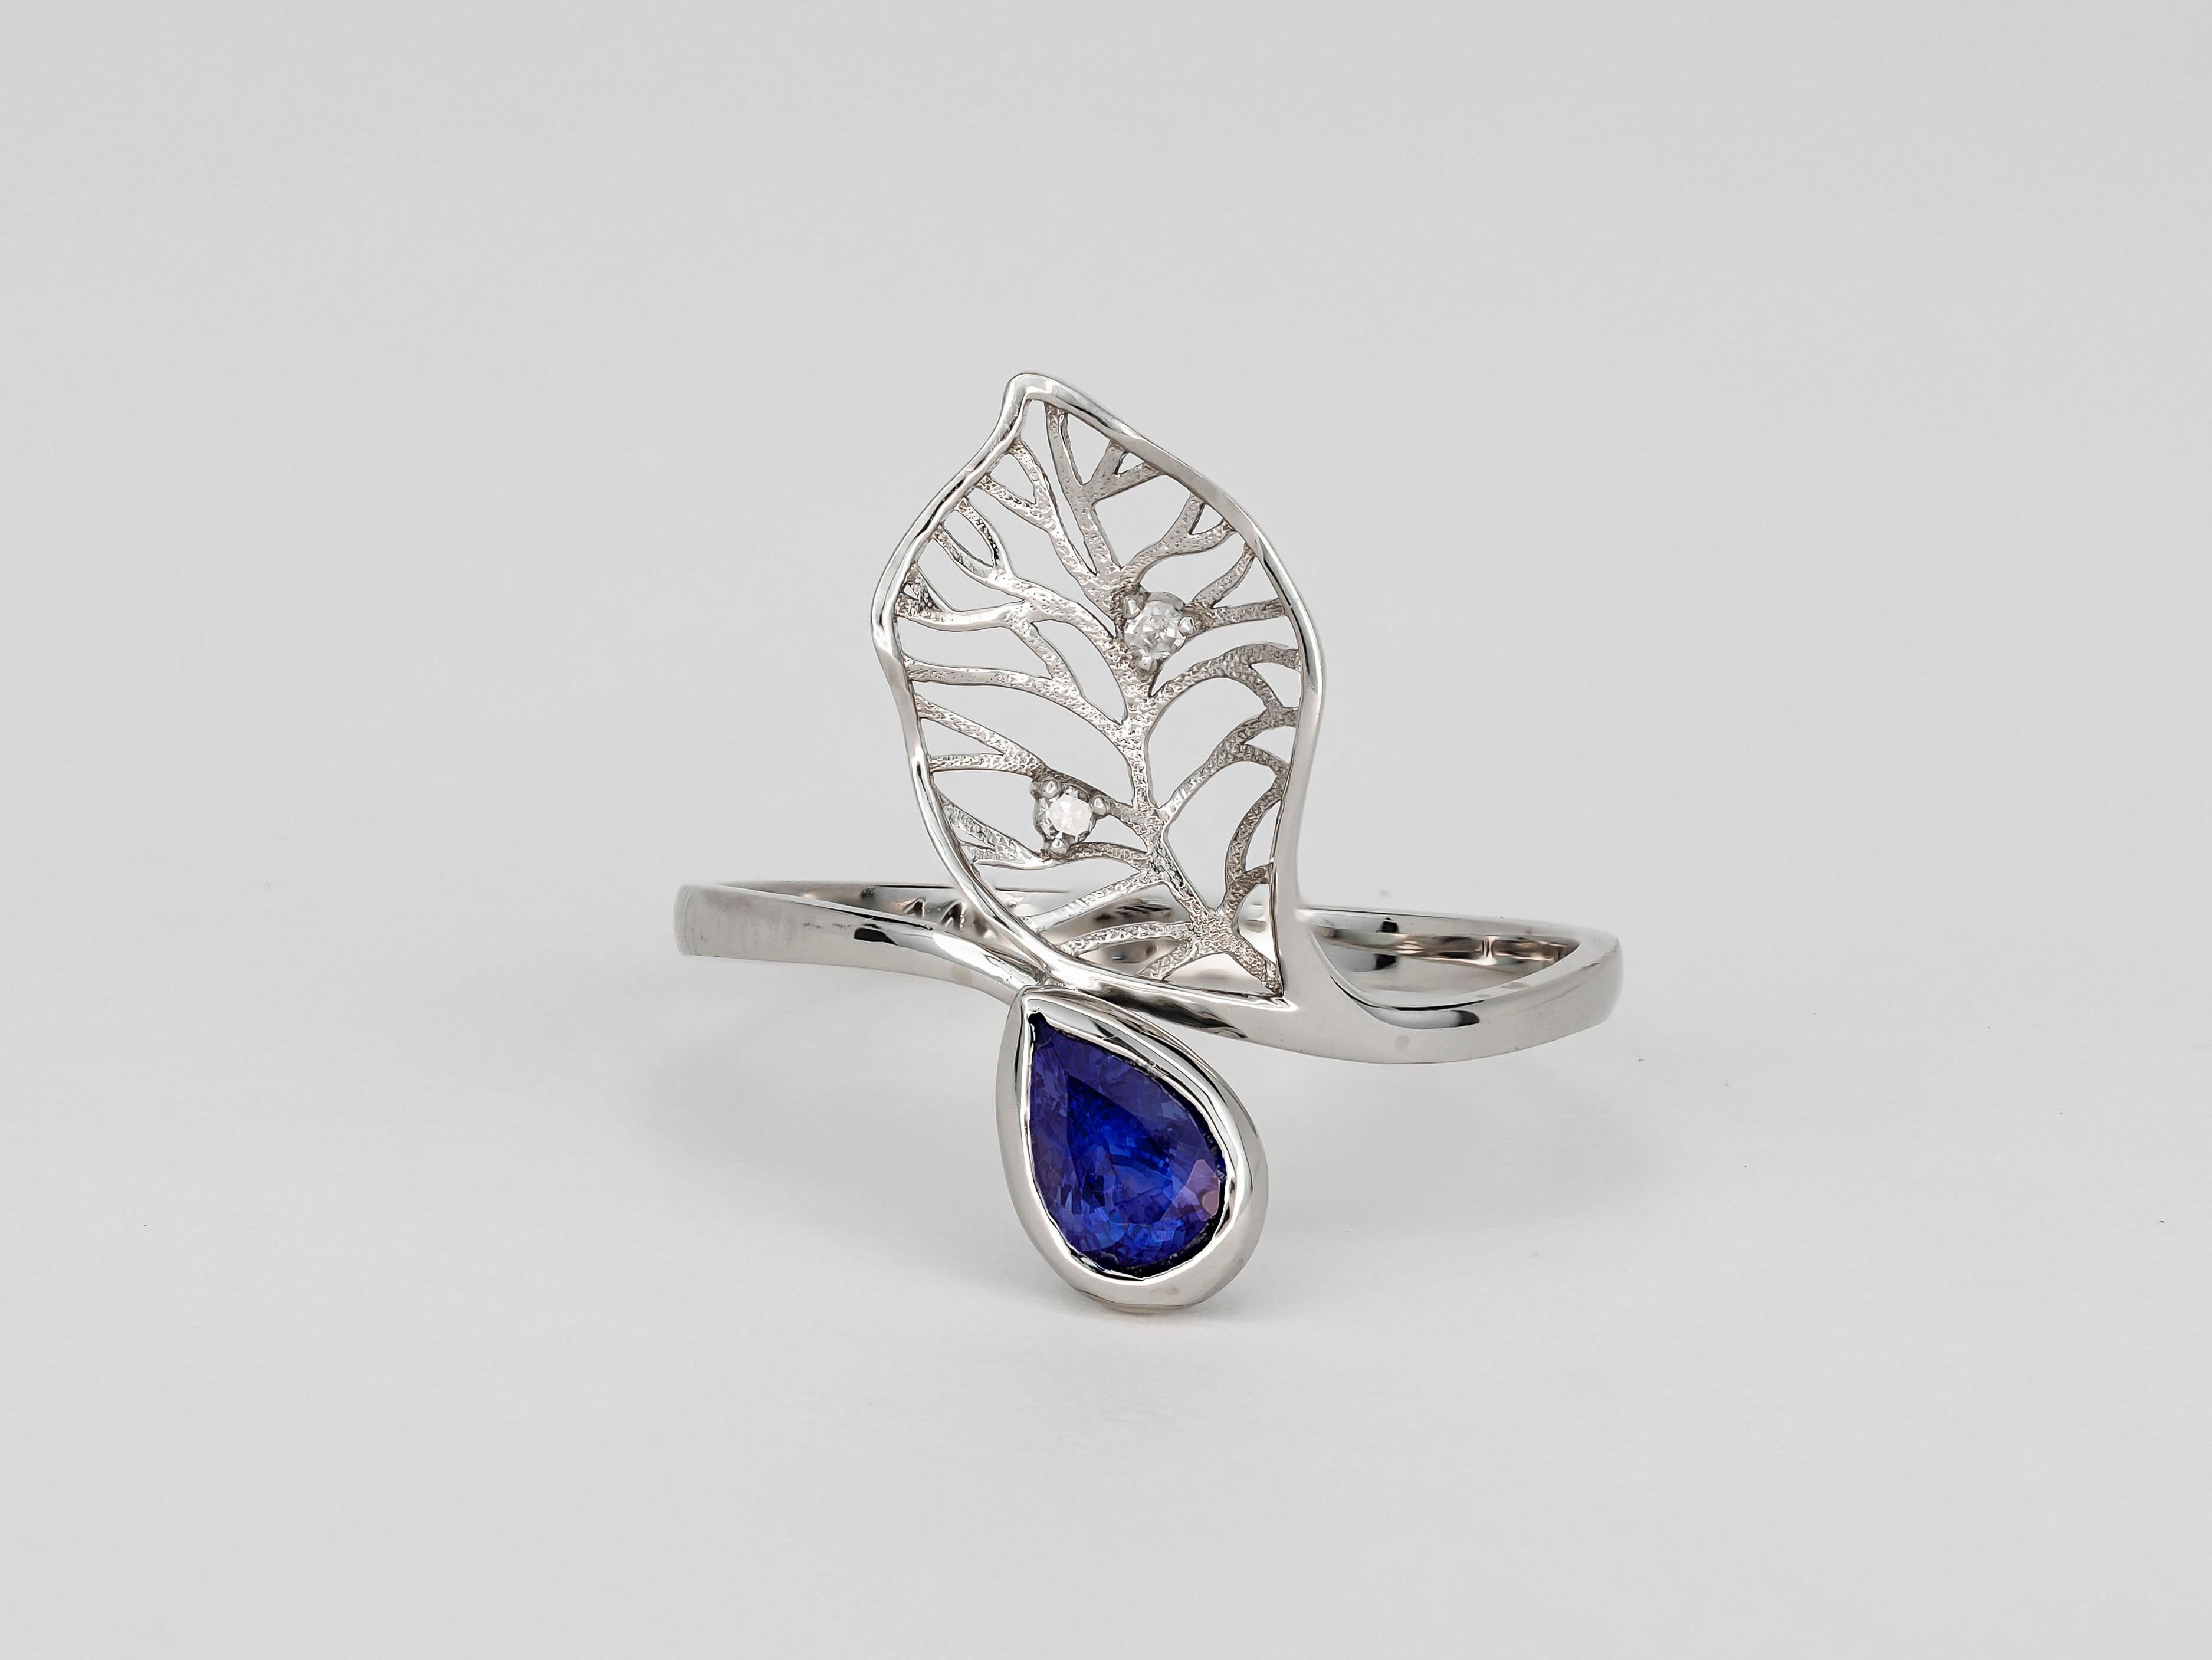 Pear Cut 14 Karat Gold Ring with Sapphire and Diamonds. Floral Design Ring with Sapphire For Sale